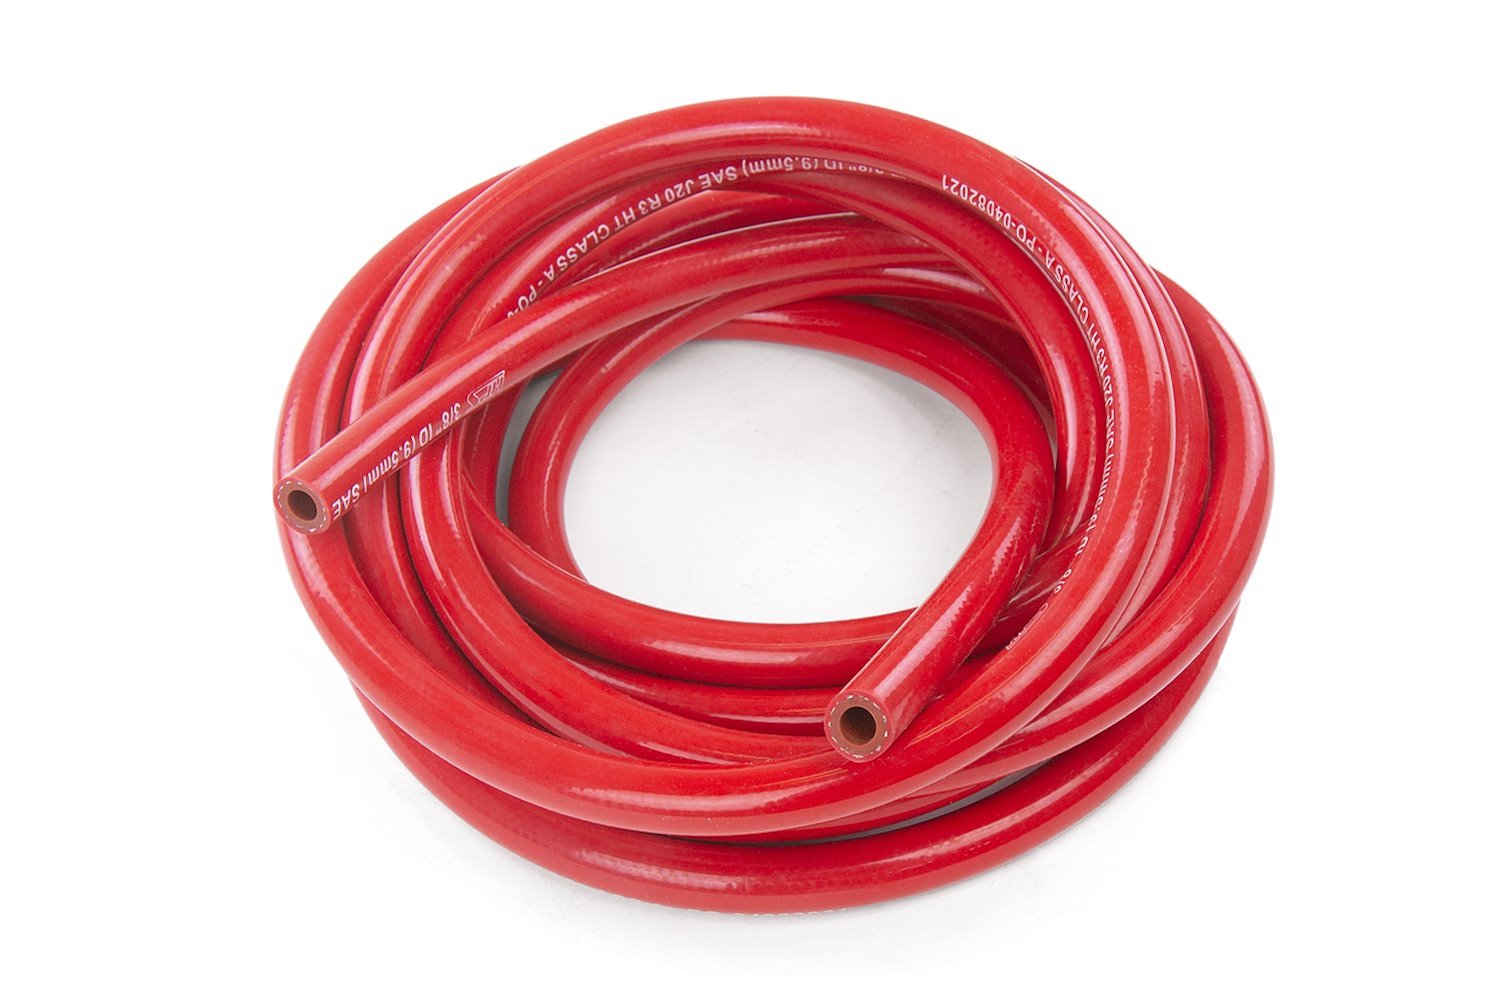 HTHH-038-REDx25 Silicone Heater Hose Tubing, High-Temp 1-Ply Reinforced, 3/8 in. ID, 25 ft. Roll, Red